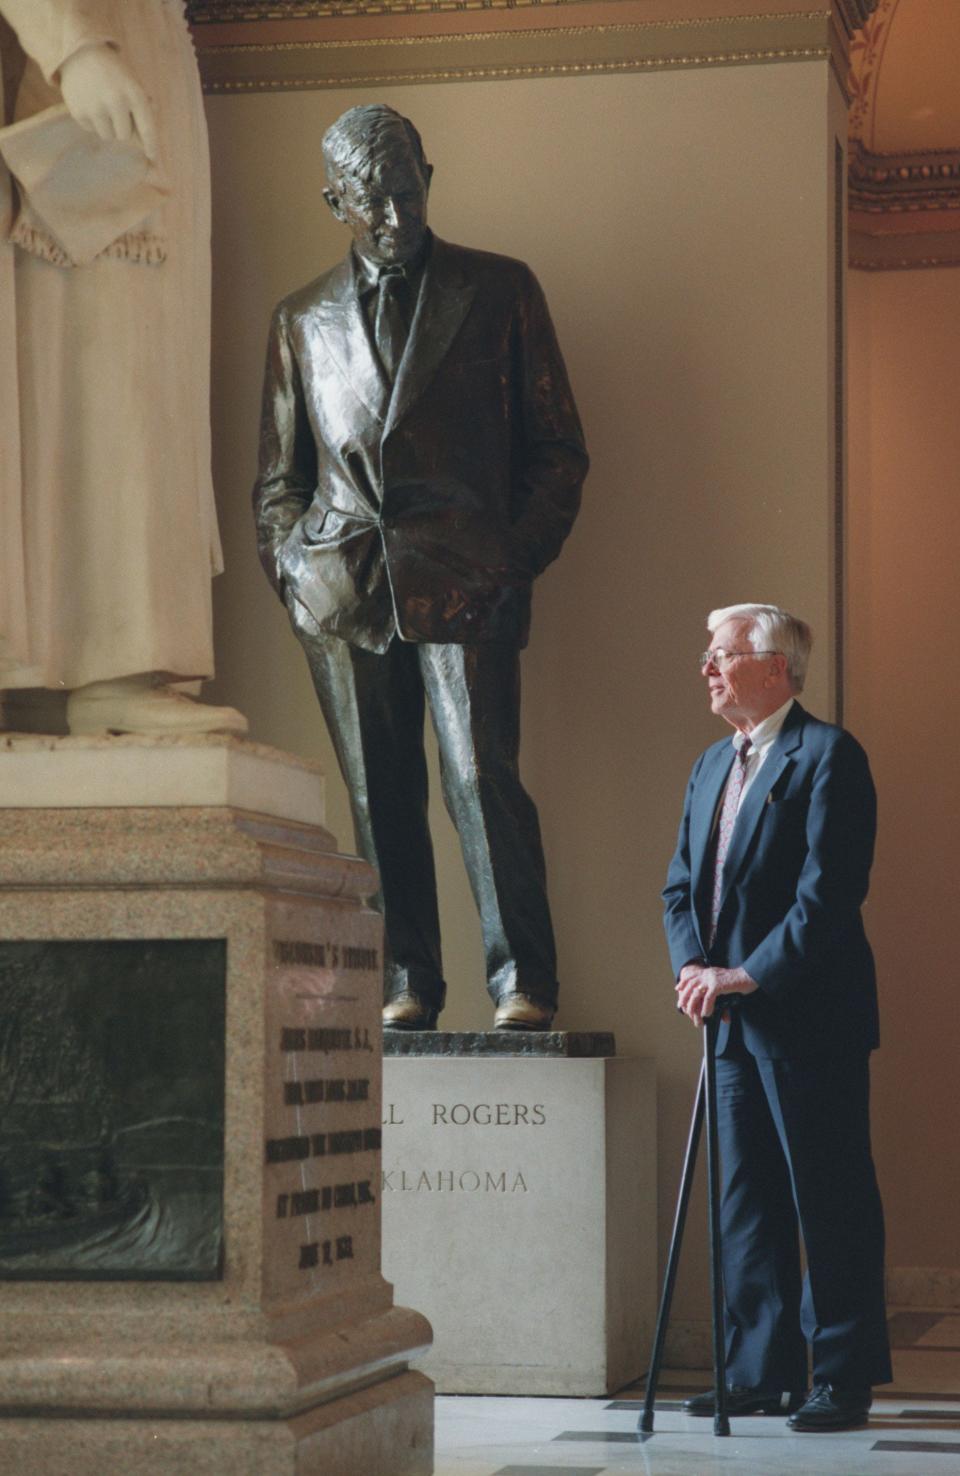 U.S. Rep. Charles Bennett was photographed in 2005 in the U.S. Capitol's Statuary Hall. (Bob Self/Florida Times-Union)